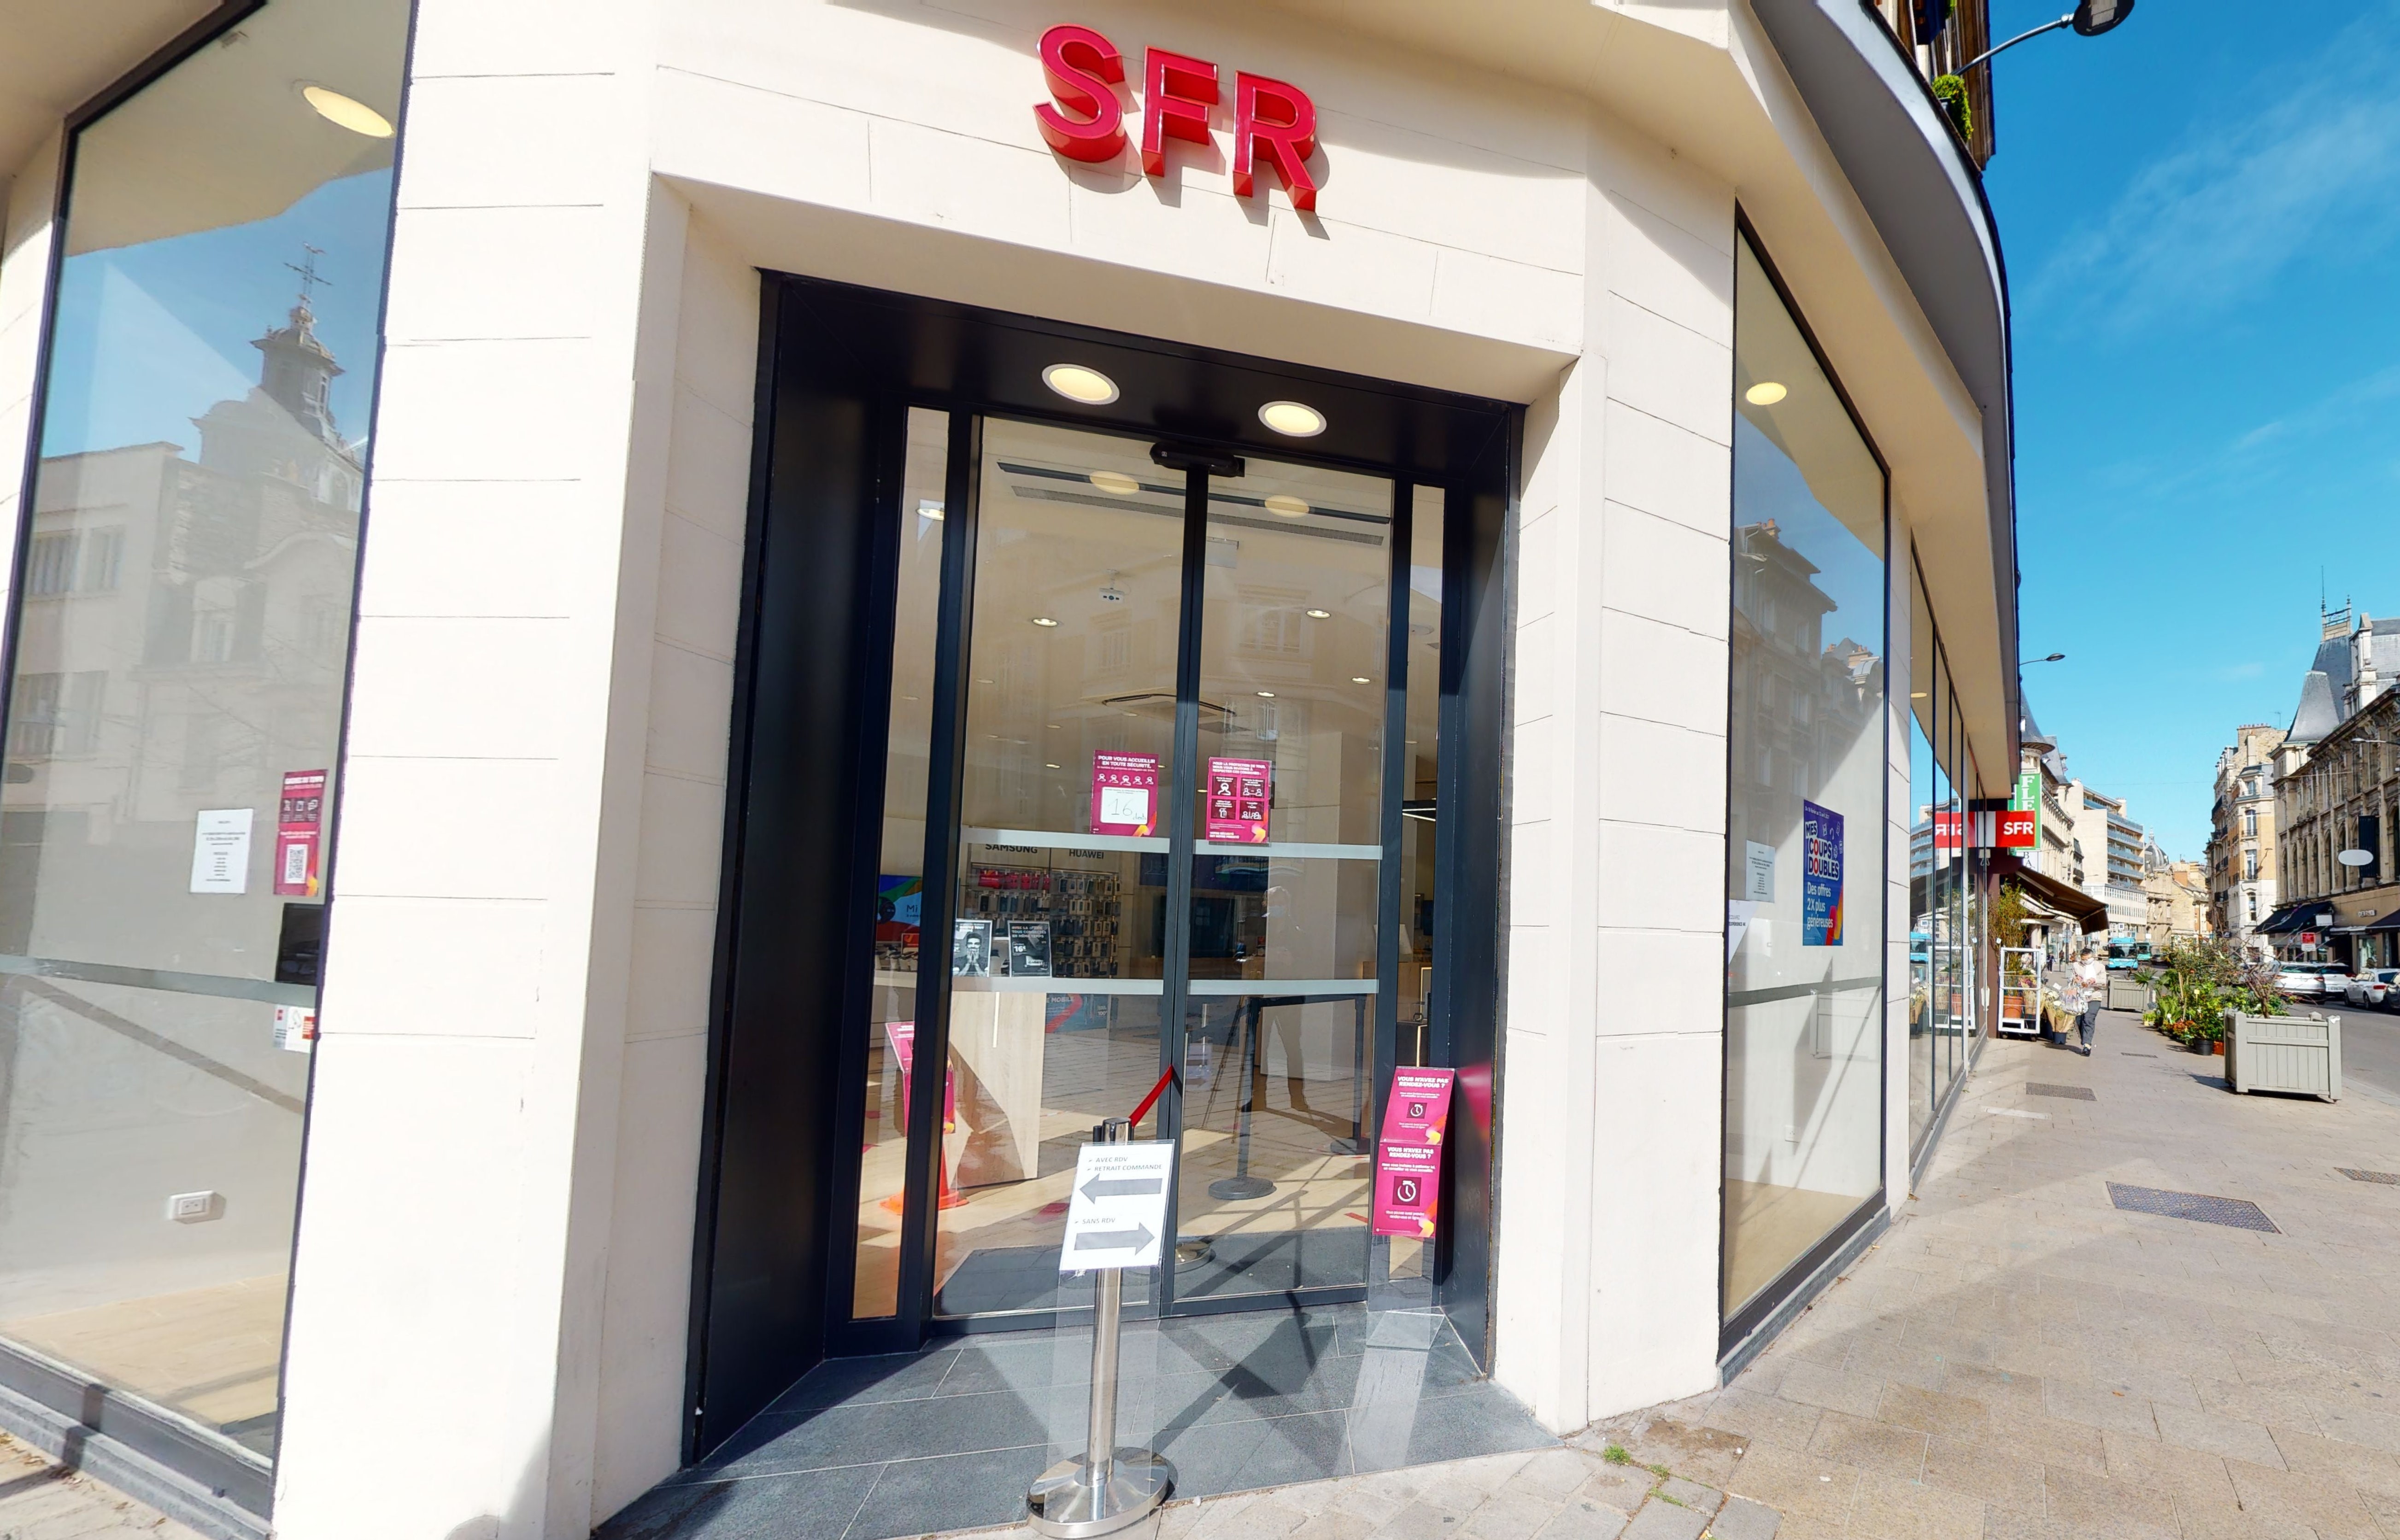 Images SFR Reims Talleyrand